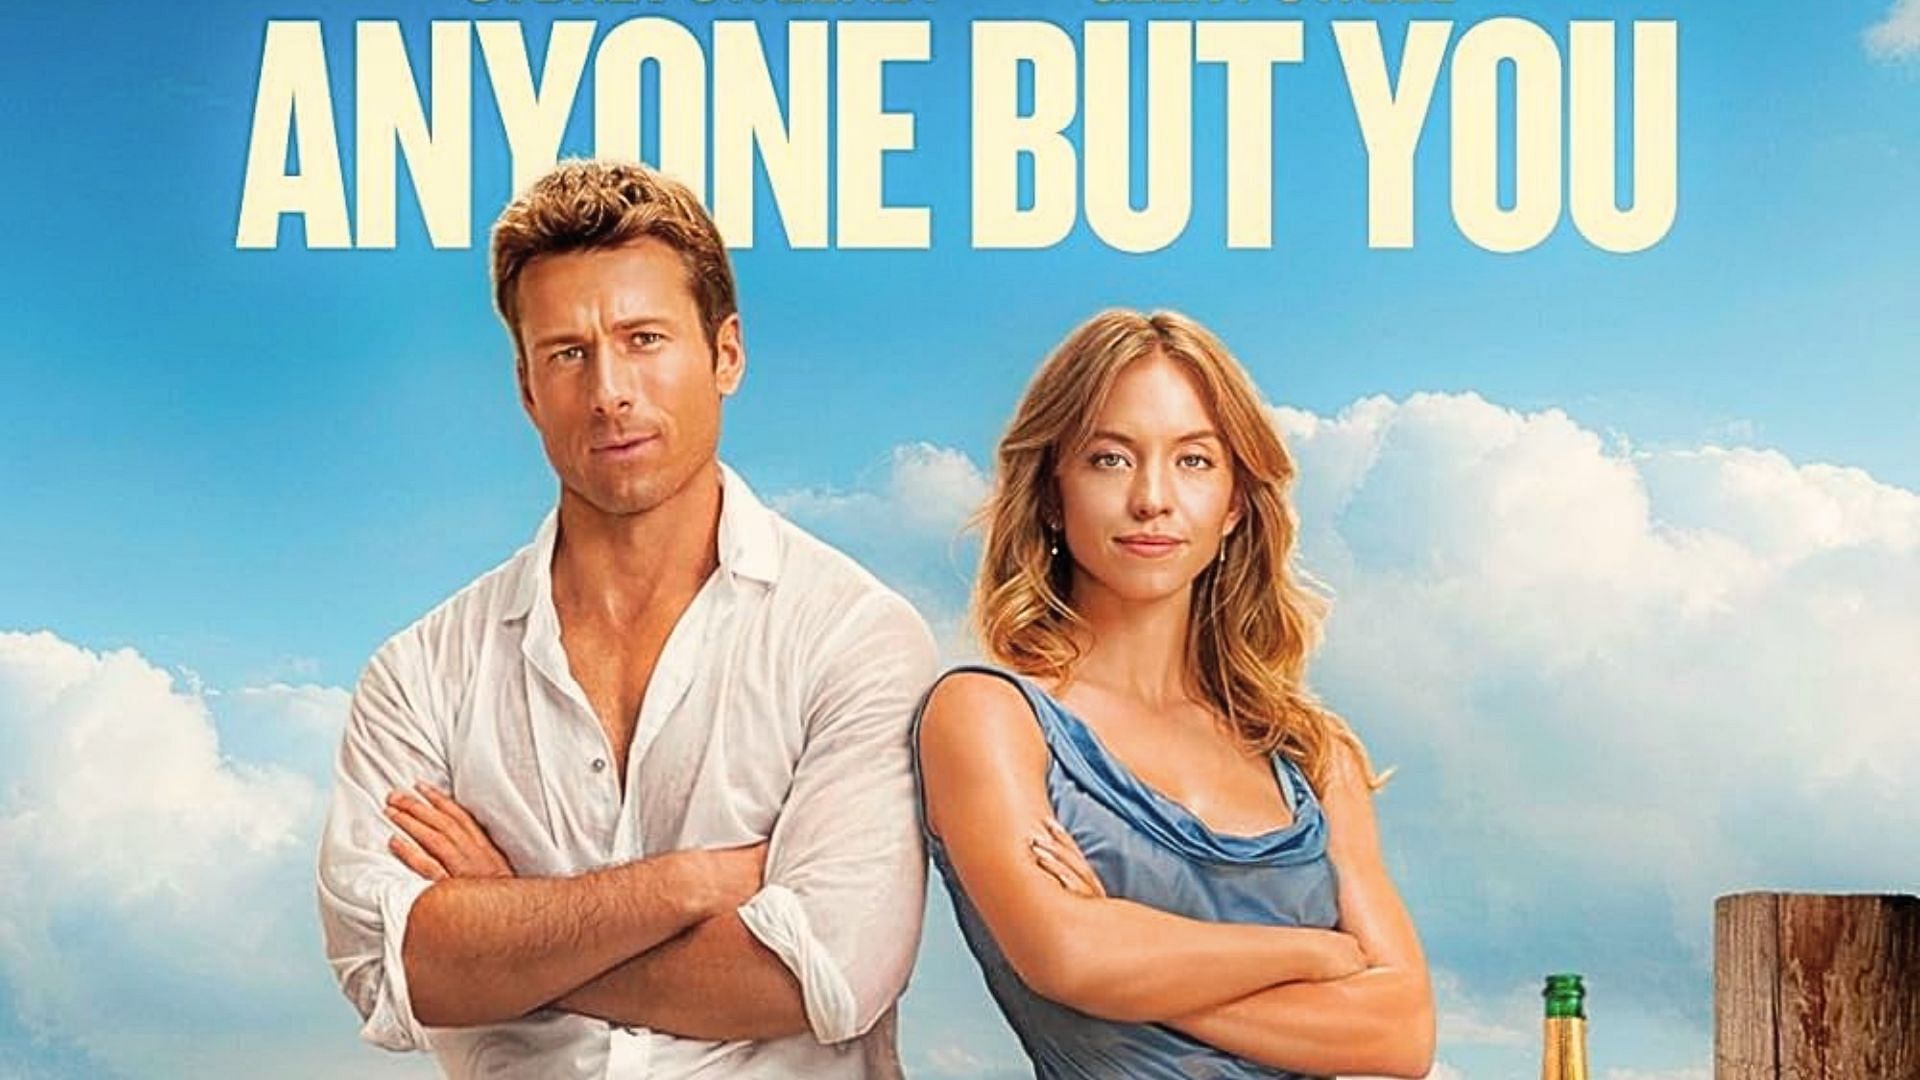 Anyone But You: The Valentine Encore dropped February 9 (Image via Sony Pictures)